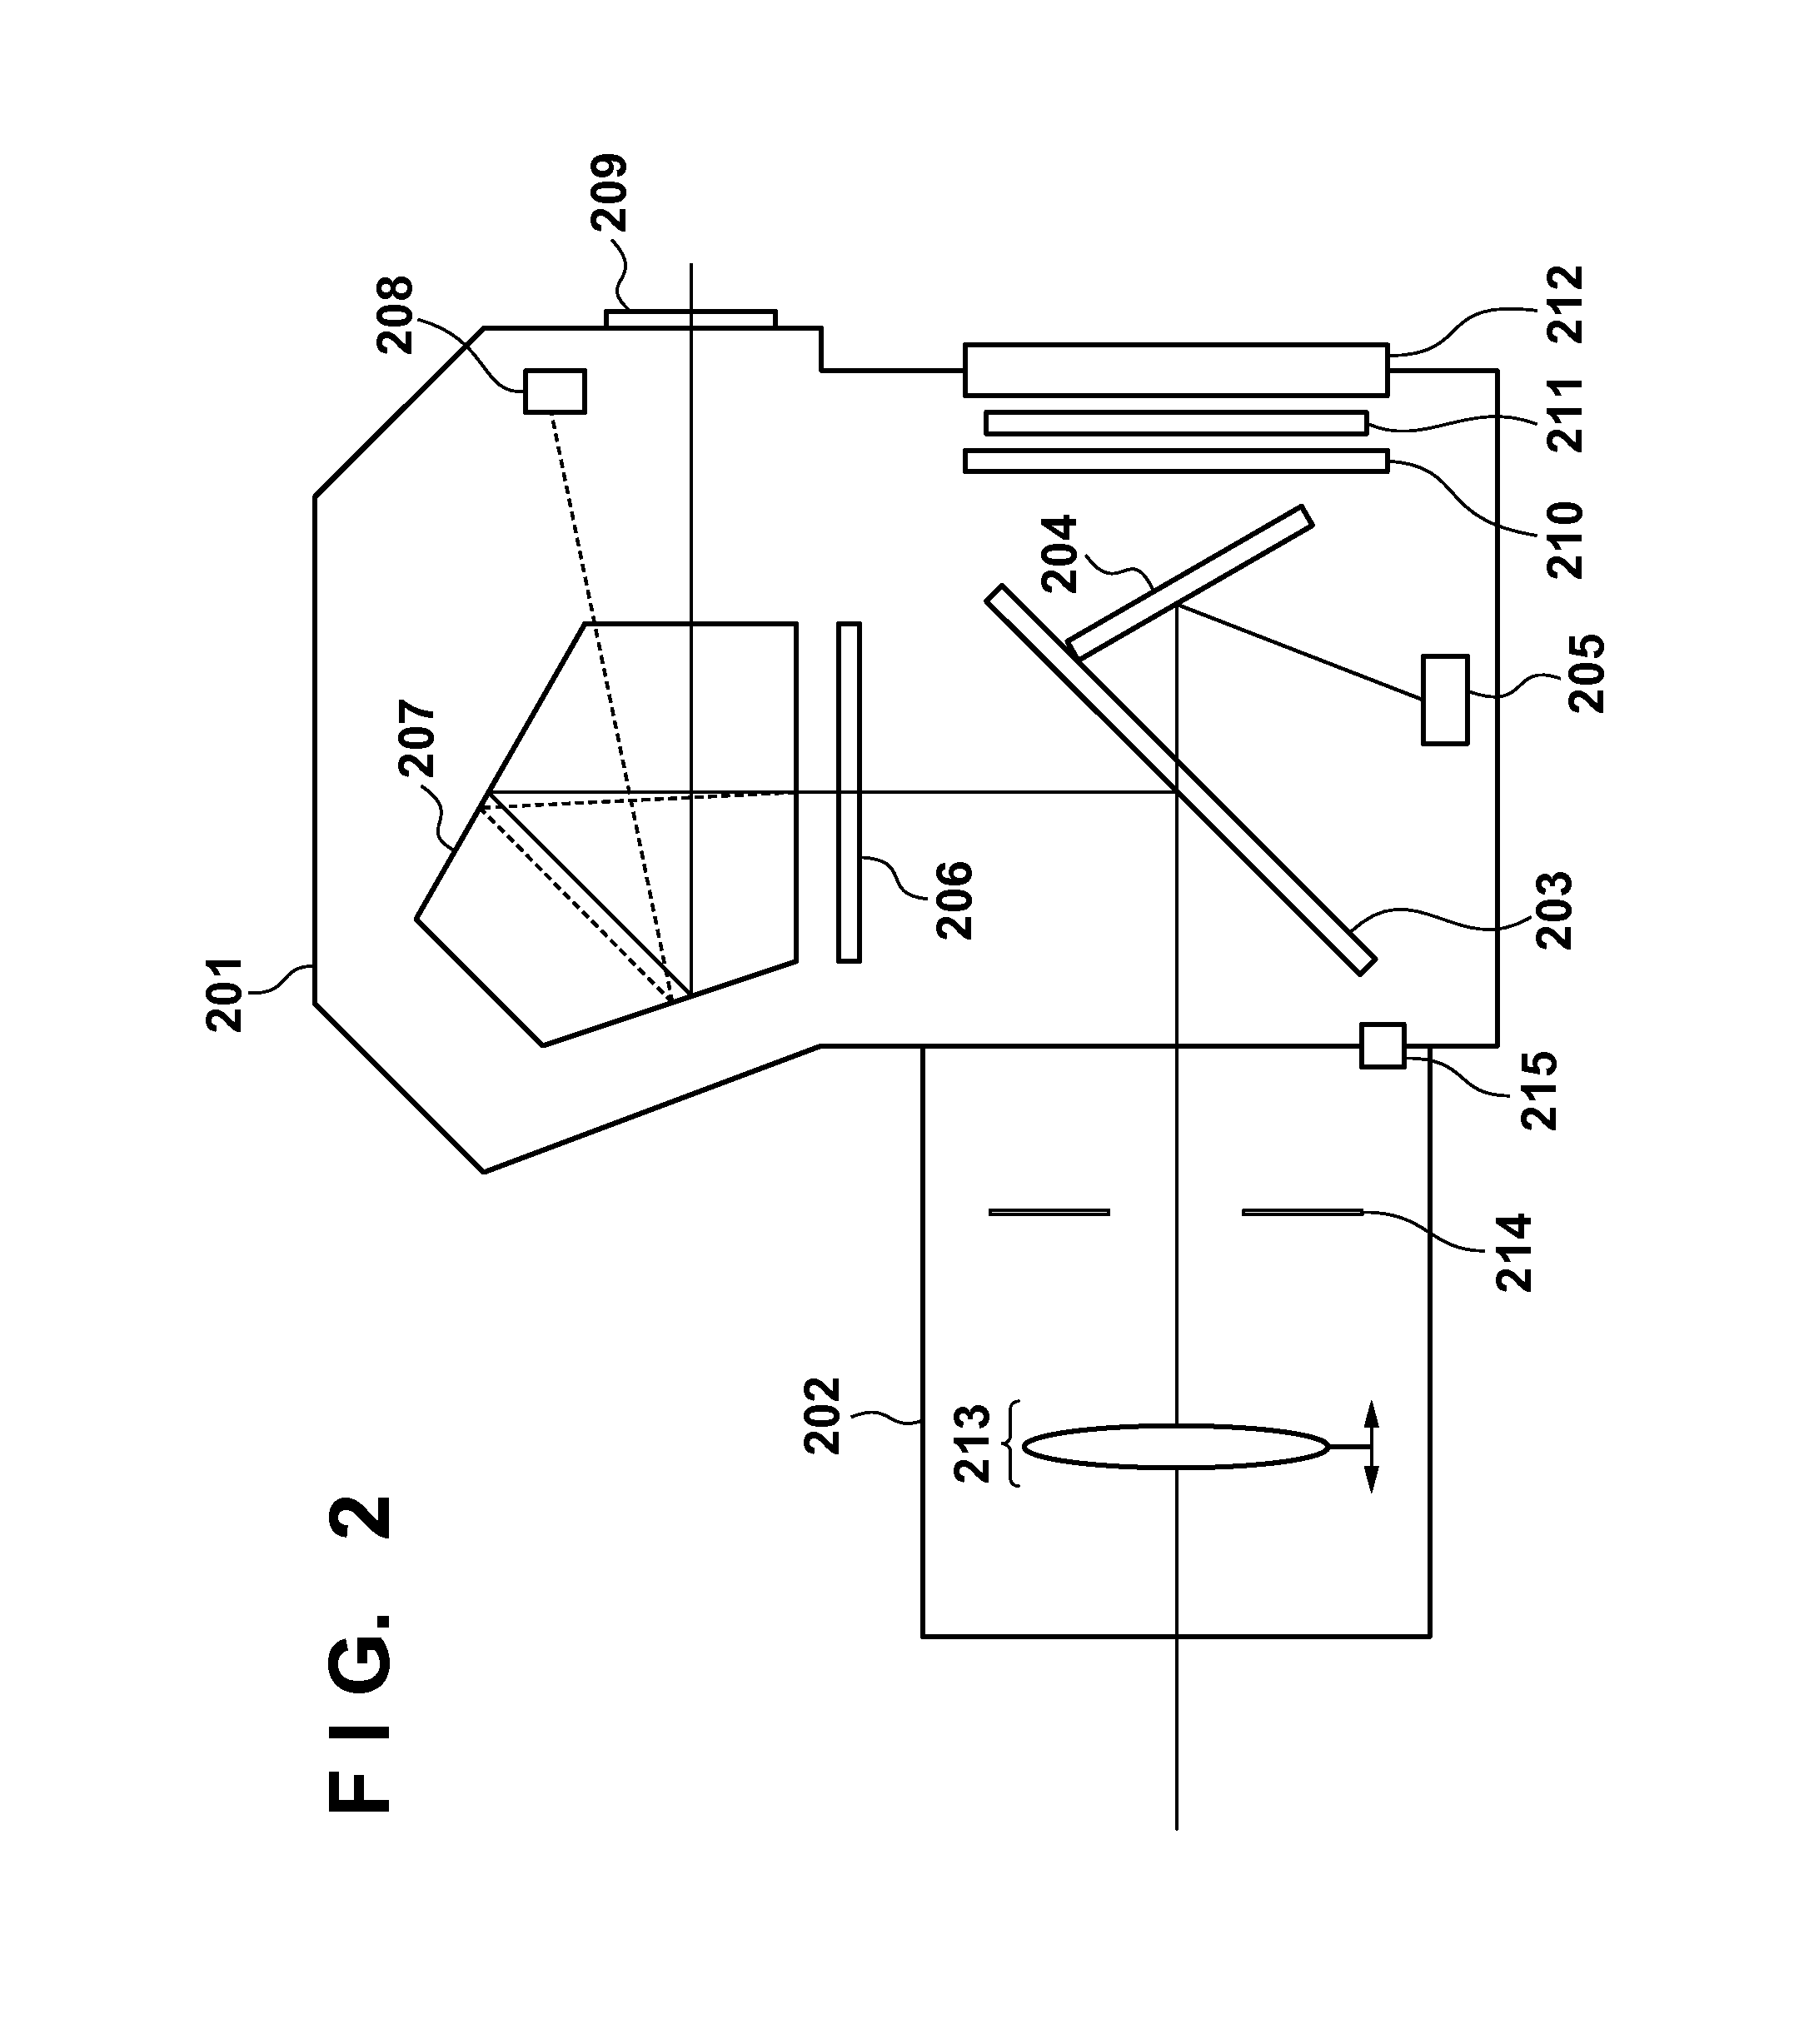 Image capture apparatus and method for tracking a subject